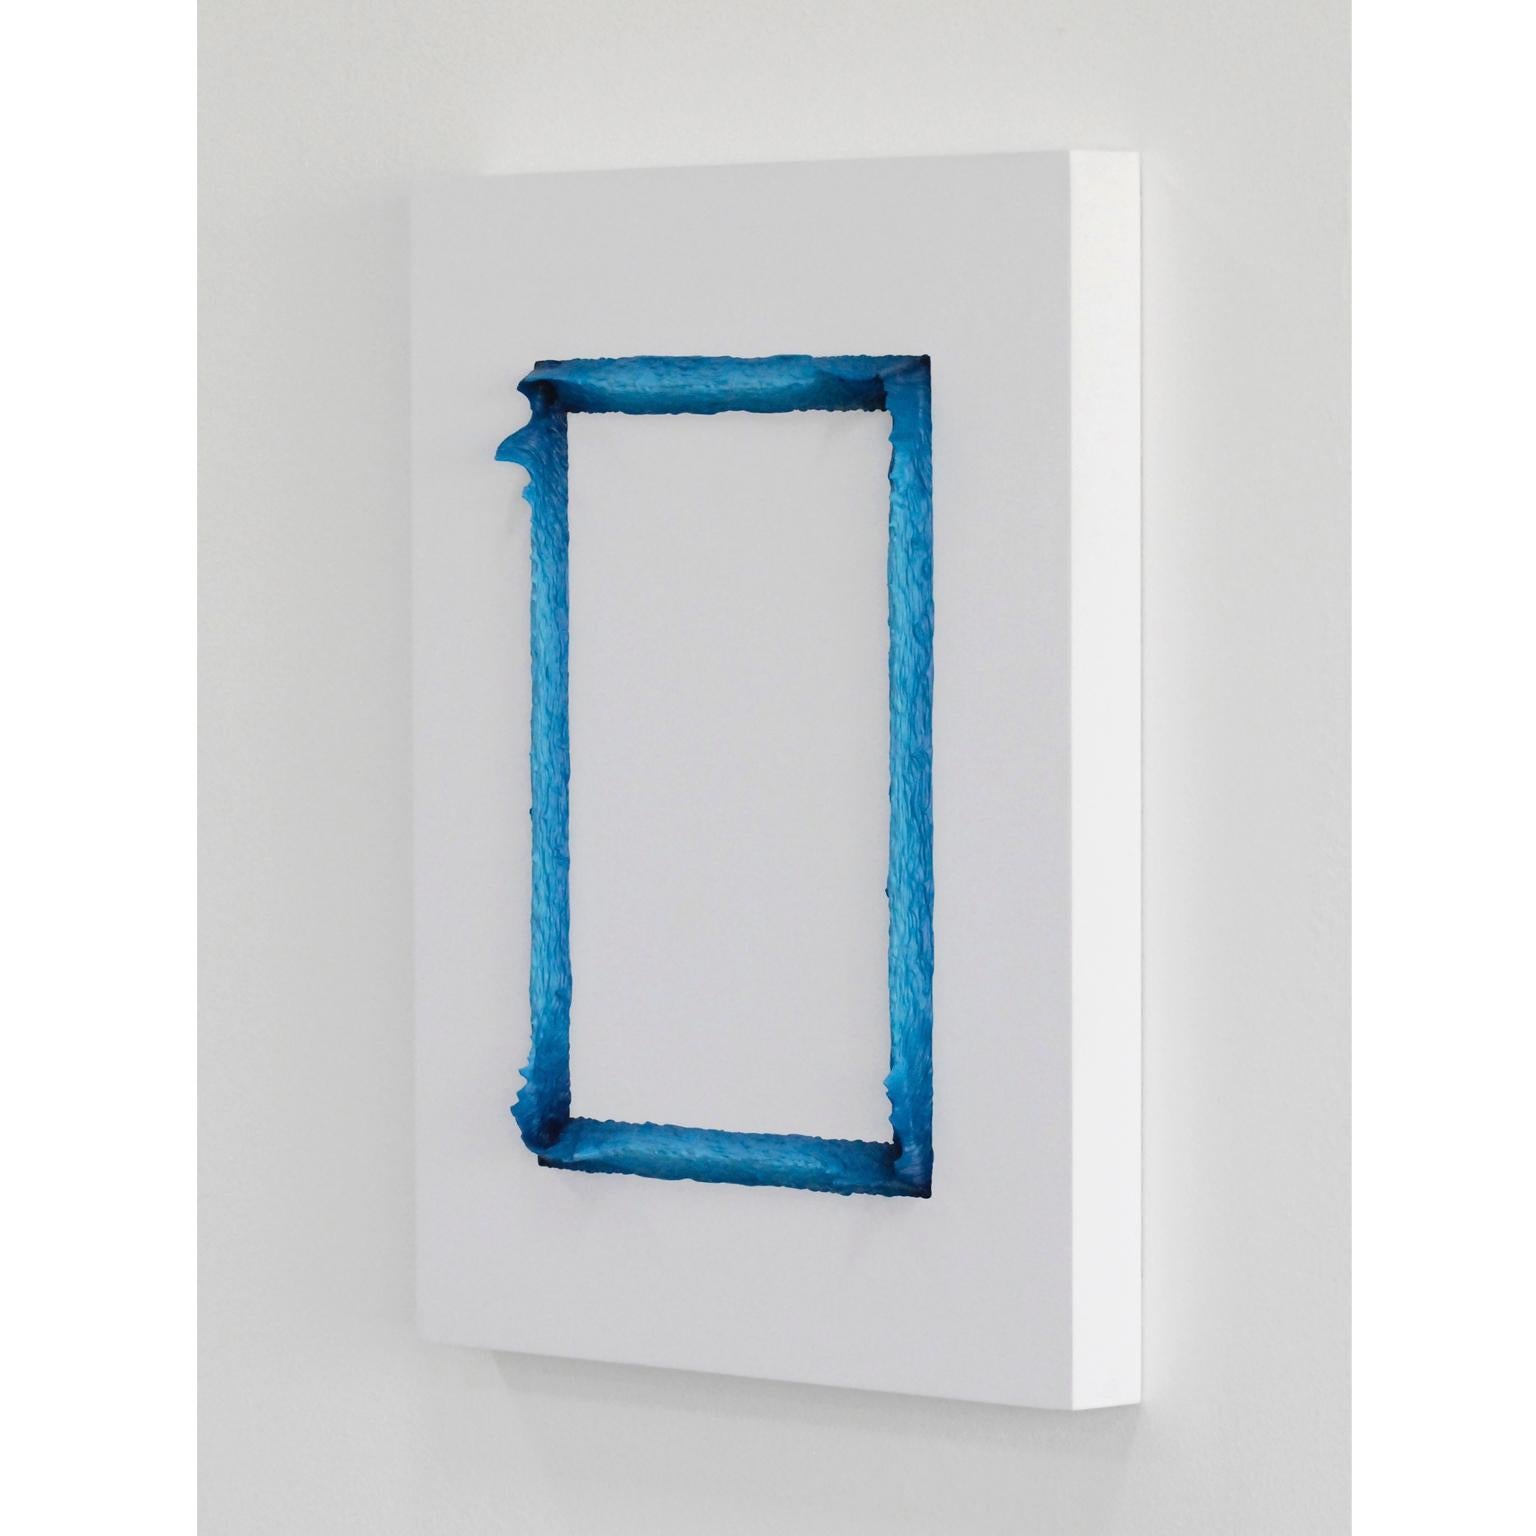 Property 989/949 (White and Prussian Blue Rectangle), process painting.
Hand painted 3D relief in acrylic paint on encaustic board. Painting with a rectangular motif with a subtle exchange of colour departing from a deep Prussian Blue to a lighter